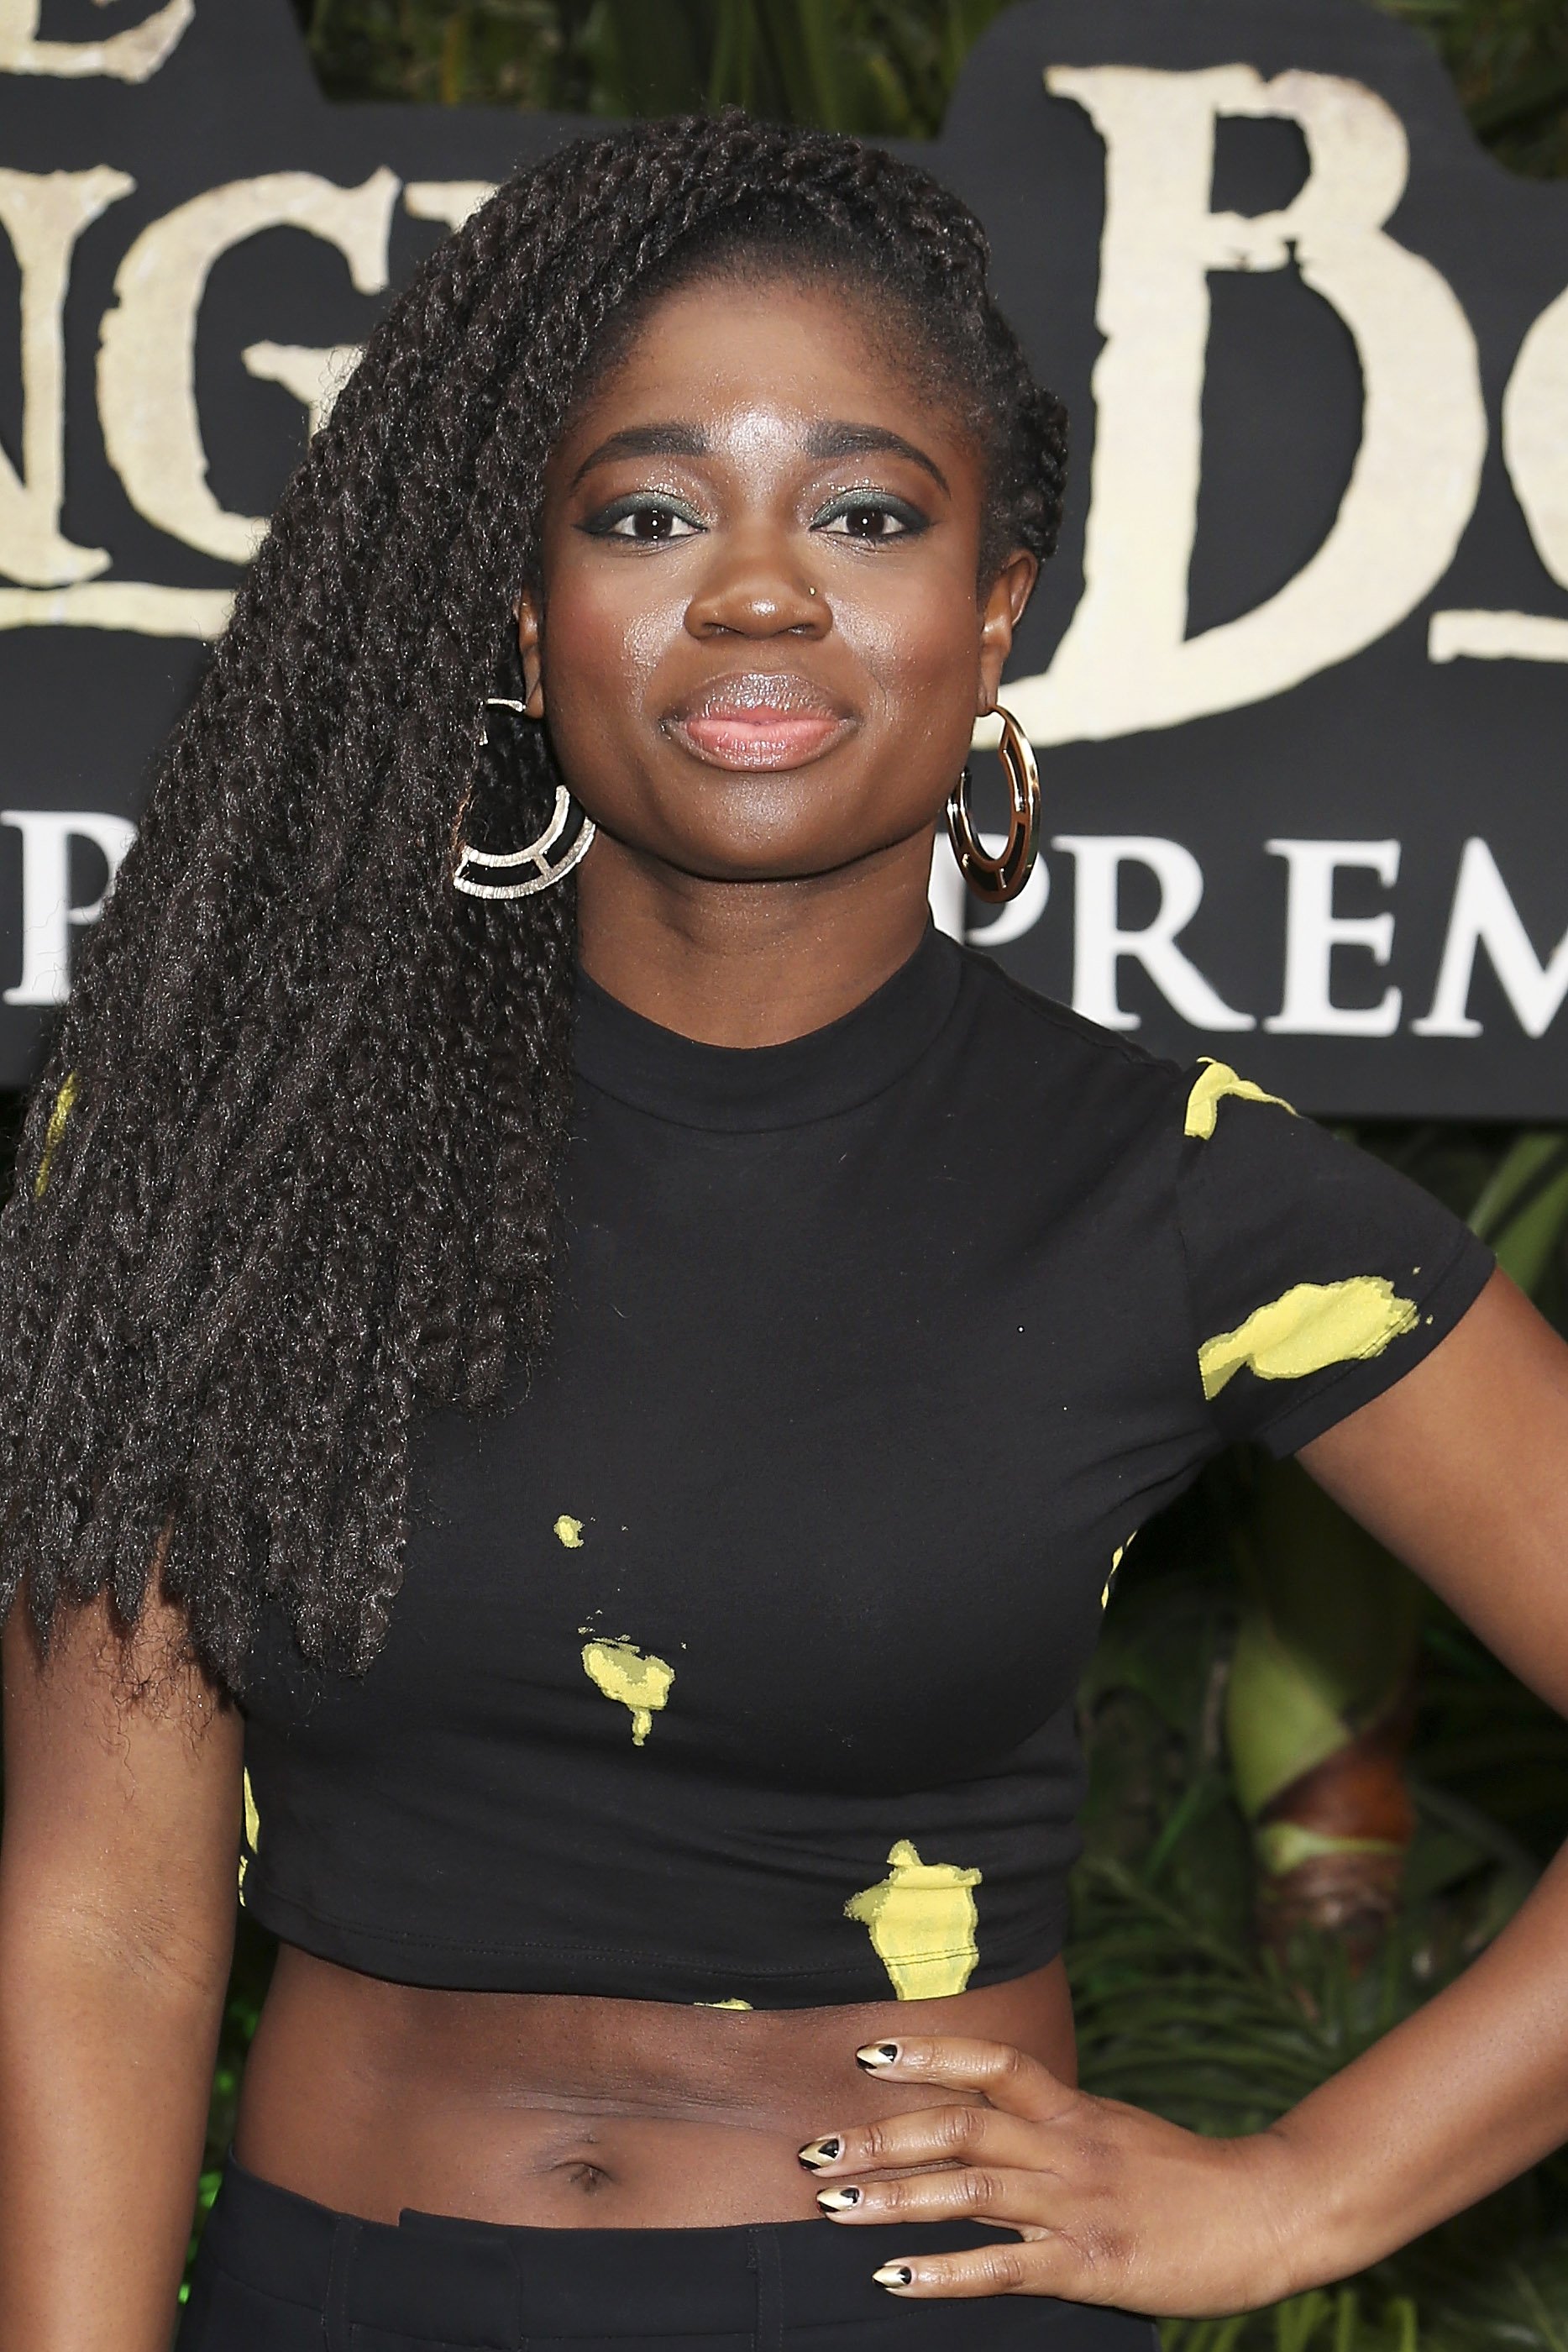 Clara Amfo wearing Marley two-strand twists at the premiere of "The Jungle Book" on April 13, 2016 in England | Source: Getty Images